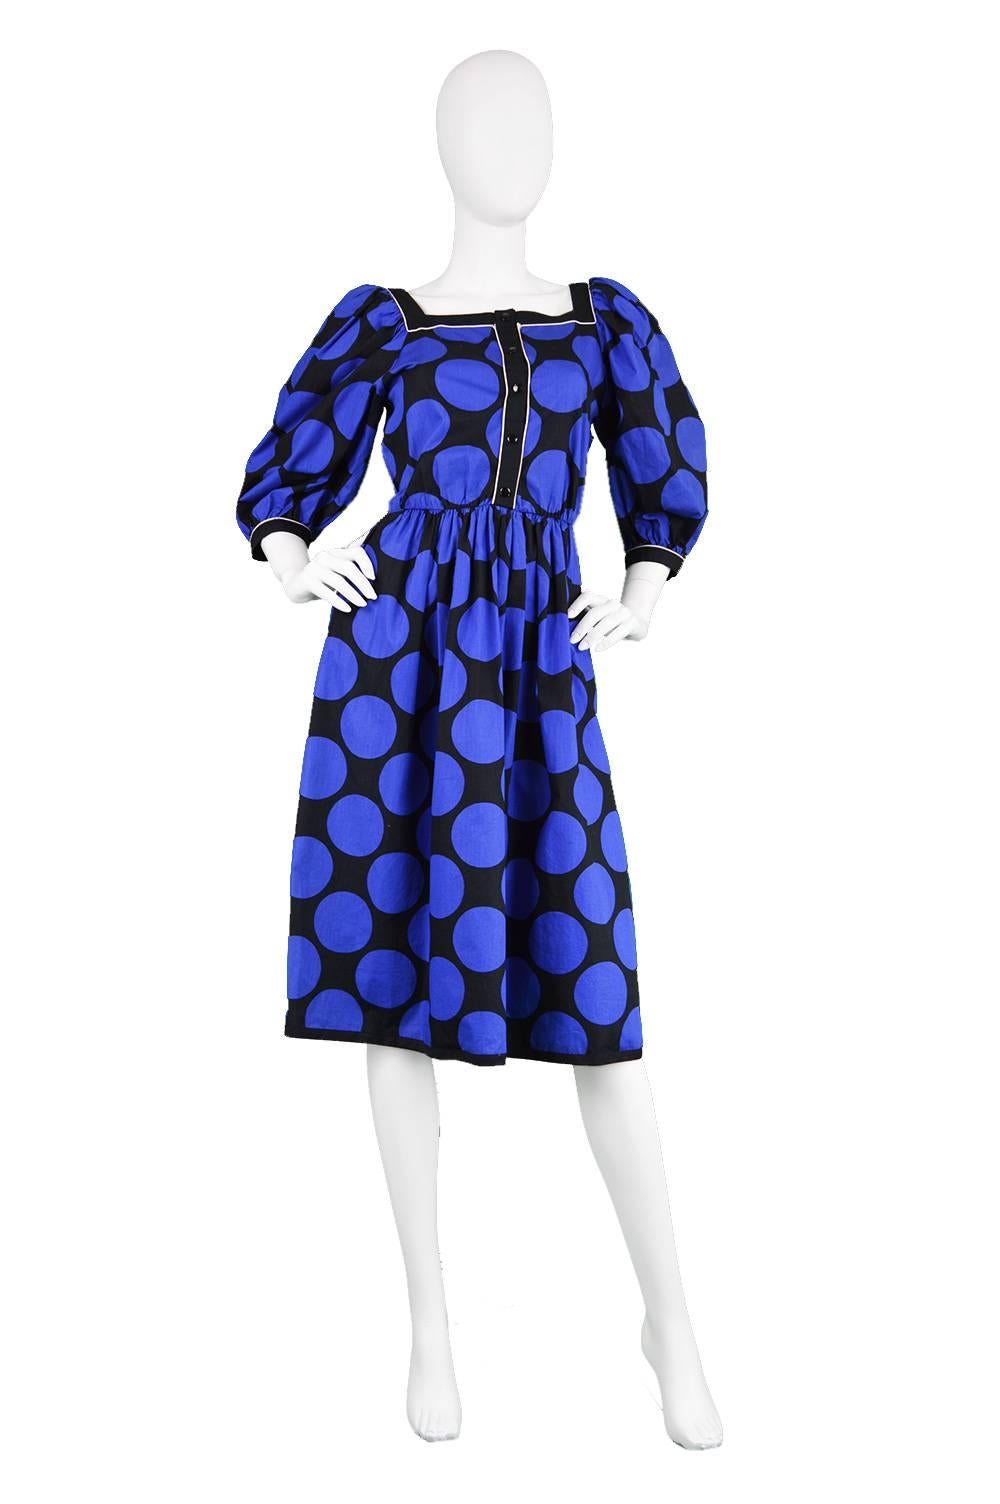 A chic vintage dress by highly regarded French designer, Louis Féraud from the 1980s, in a black and blue polka dot cotton fabric. The voluminous puff sleeves give a chic, high fashion look whilst the square neckline flaunts the wearer's